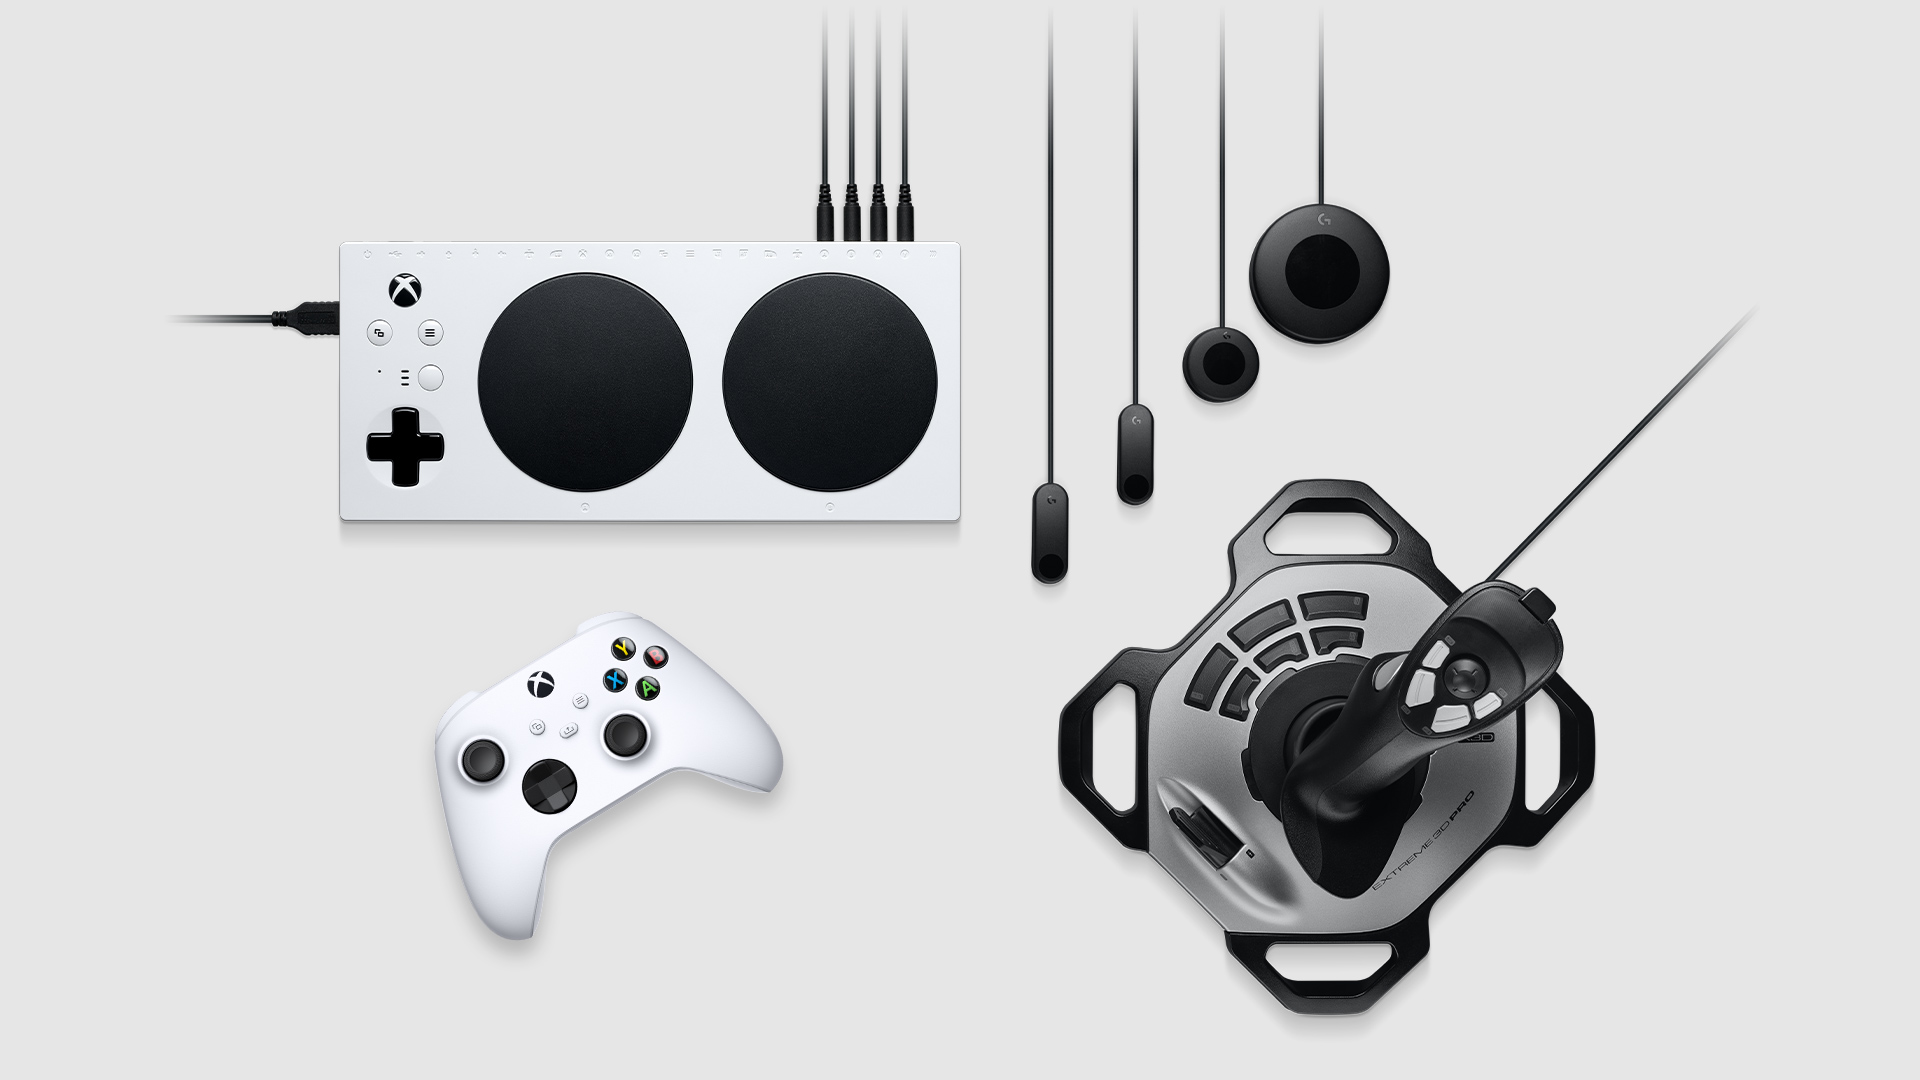 Collection of assistive accessories including Xbox adaptive controller, Logitech Adaptive Gaming Kit for Xbox adaptive controller, Xbox wireless controller, and Logitech Extreme 3D Pro Joystick. 